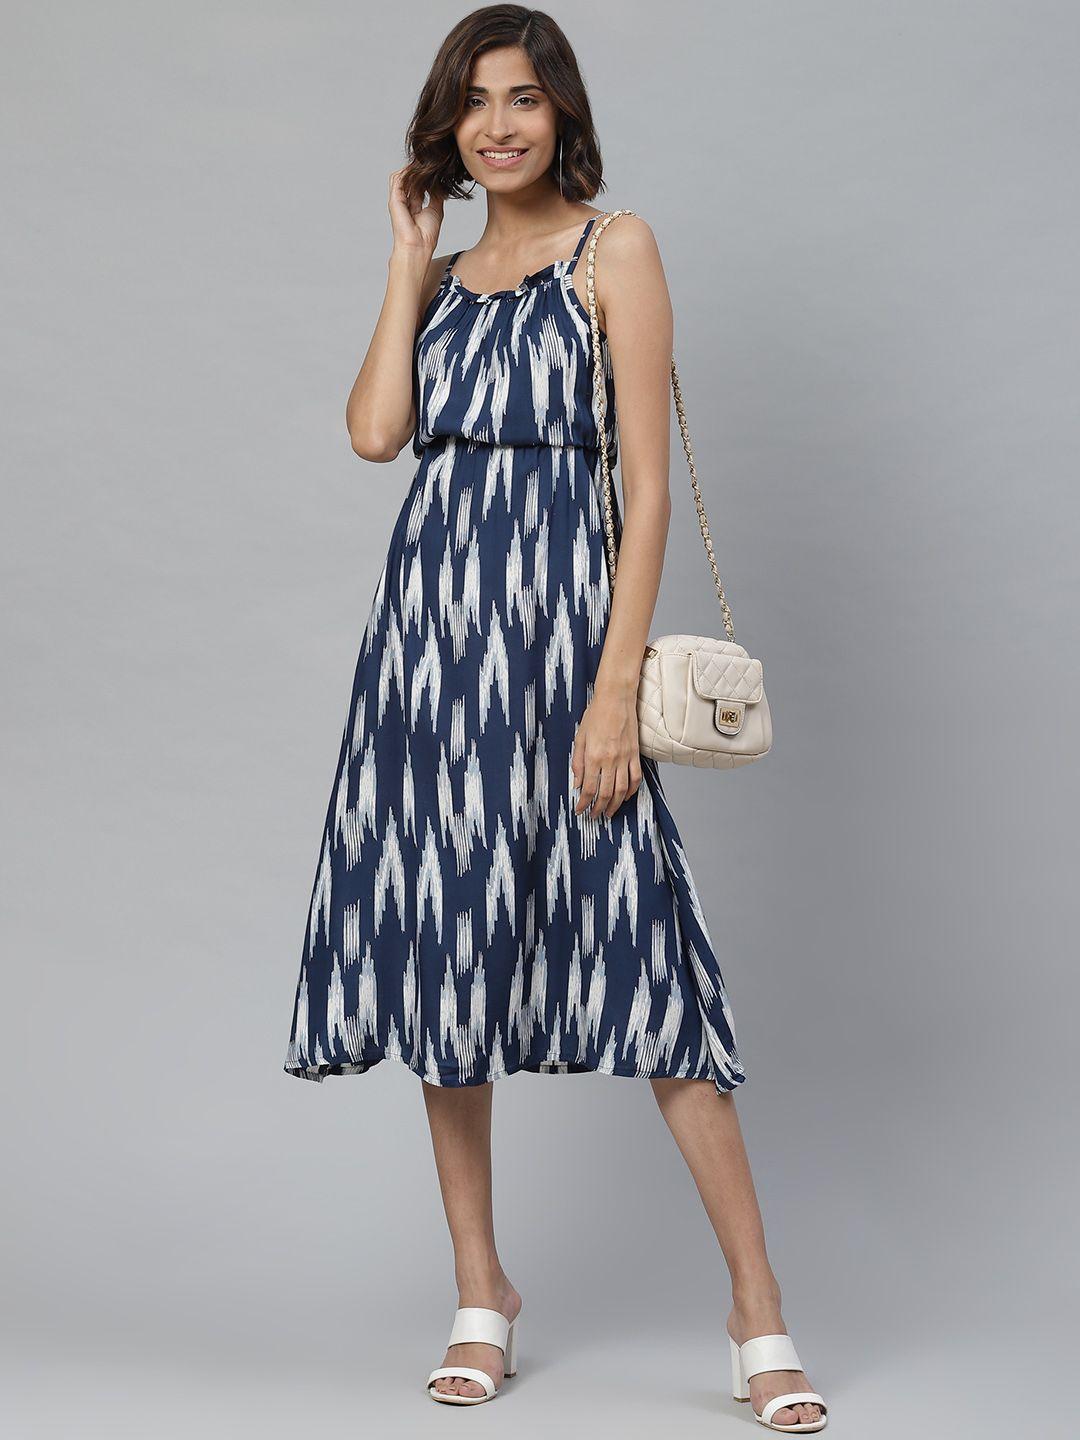 yash-gallery-women-navy-blue-&-white-abstract-print-empire-dress